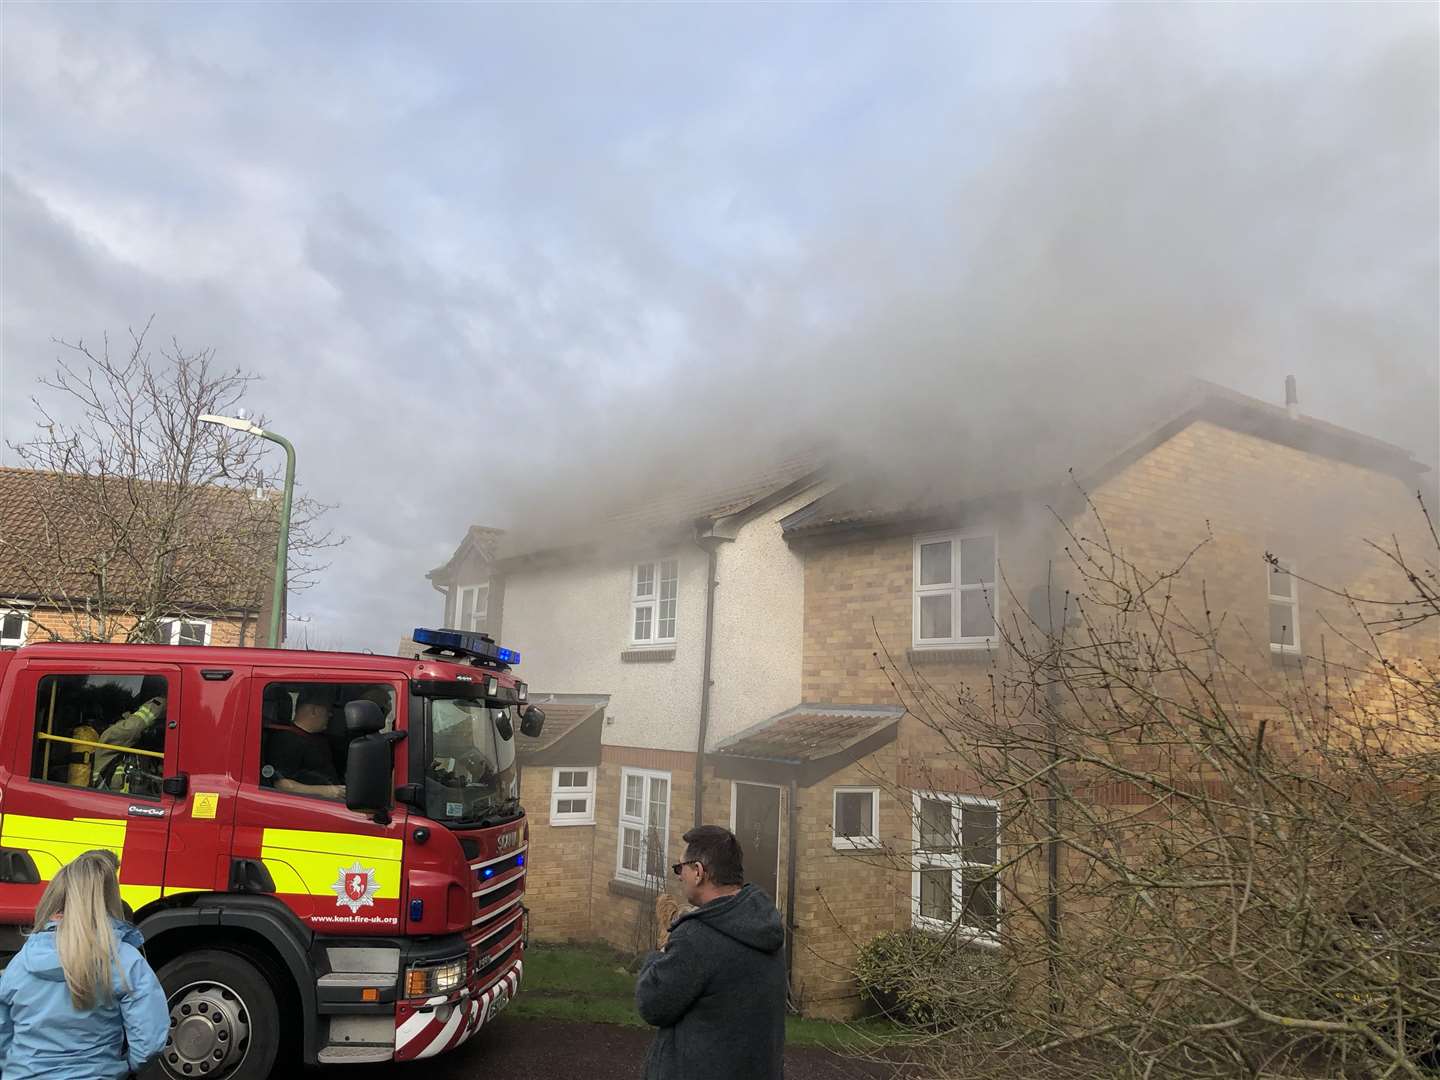 Firefighters tackled a blaze at a house in Downswood on Sunday (6793632)